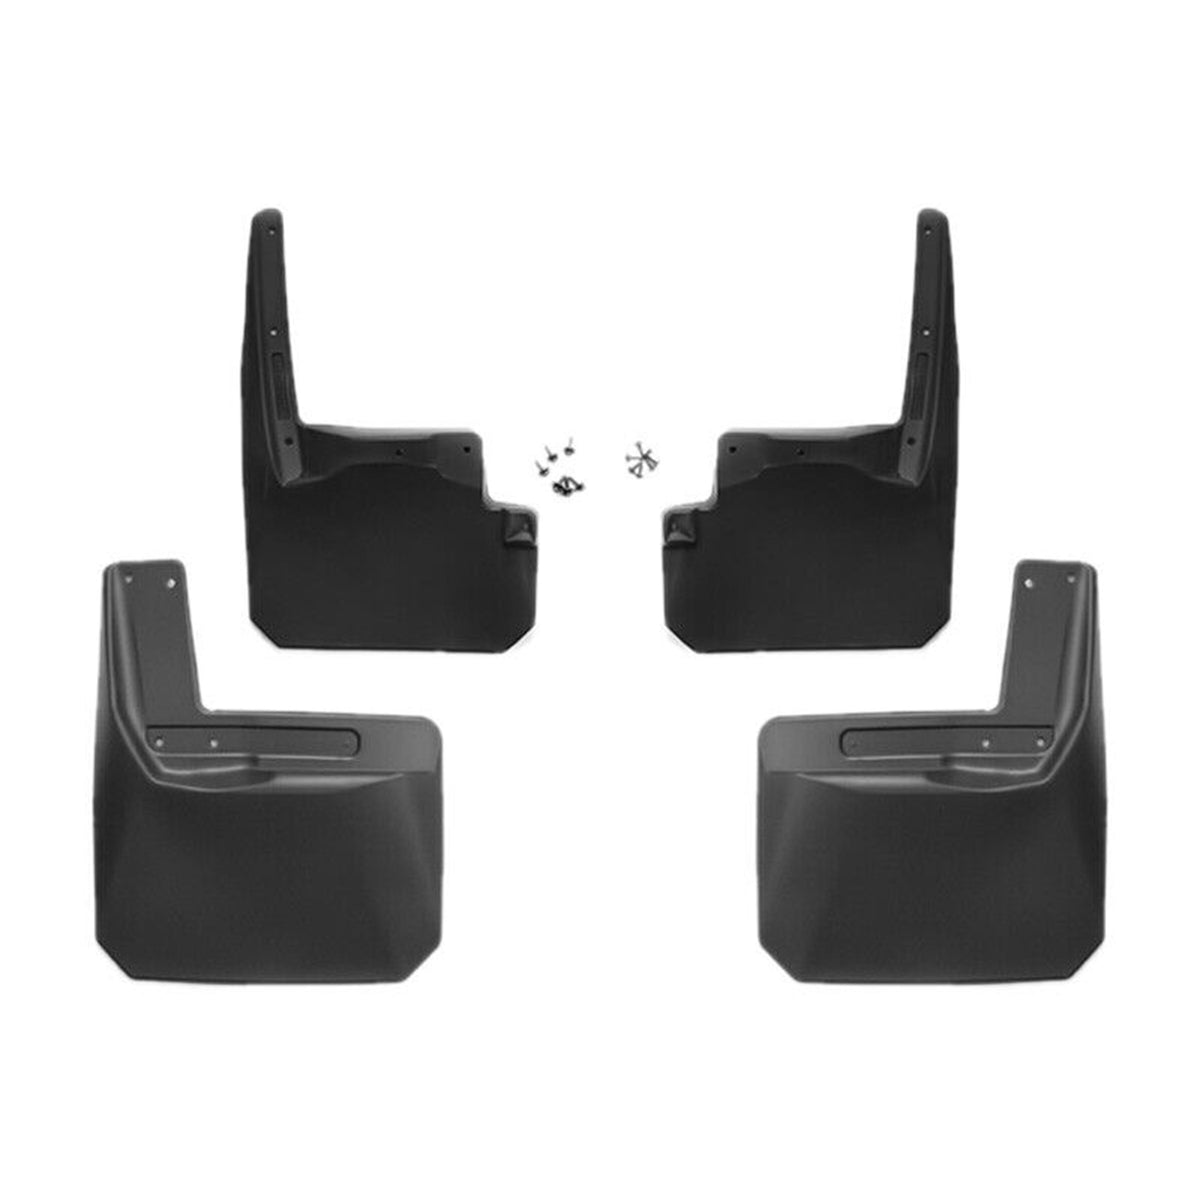 Mud flaps for Jeep Wrangler 2007-2018 plastic 4 pieces